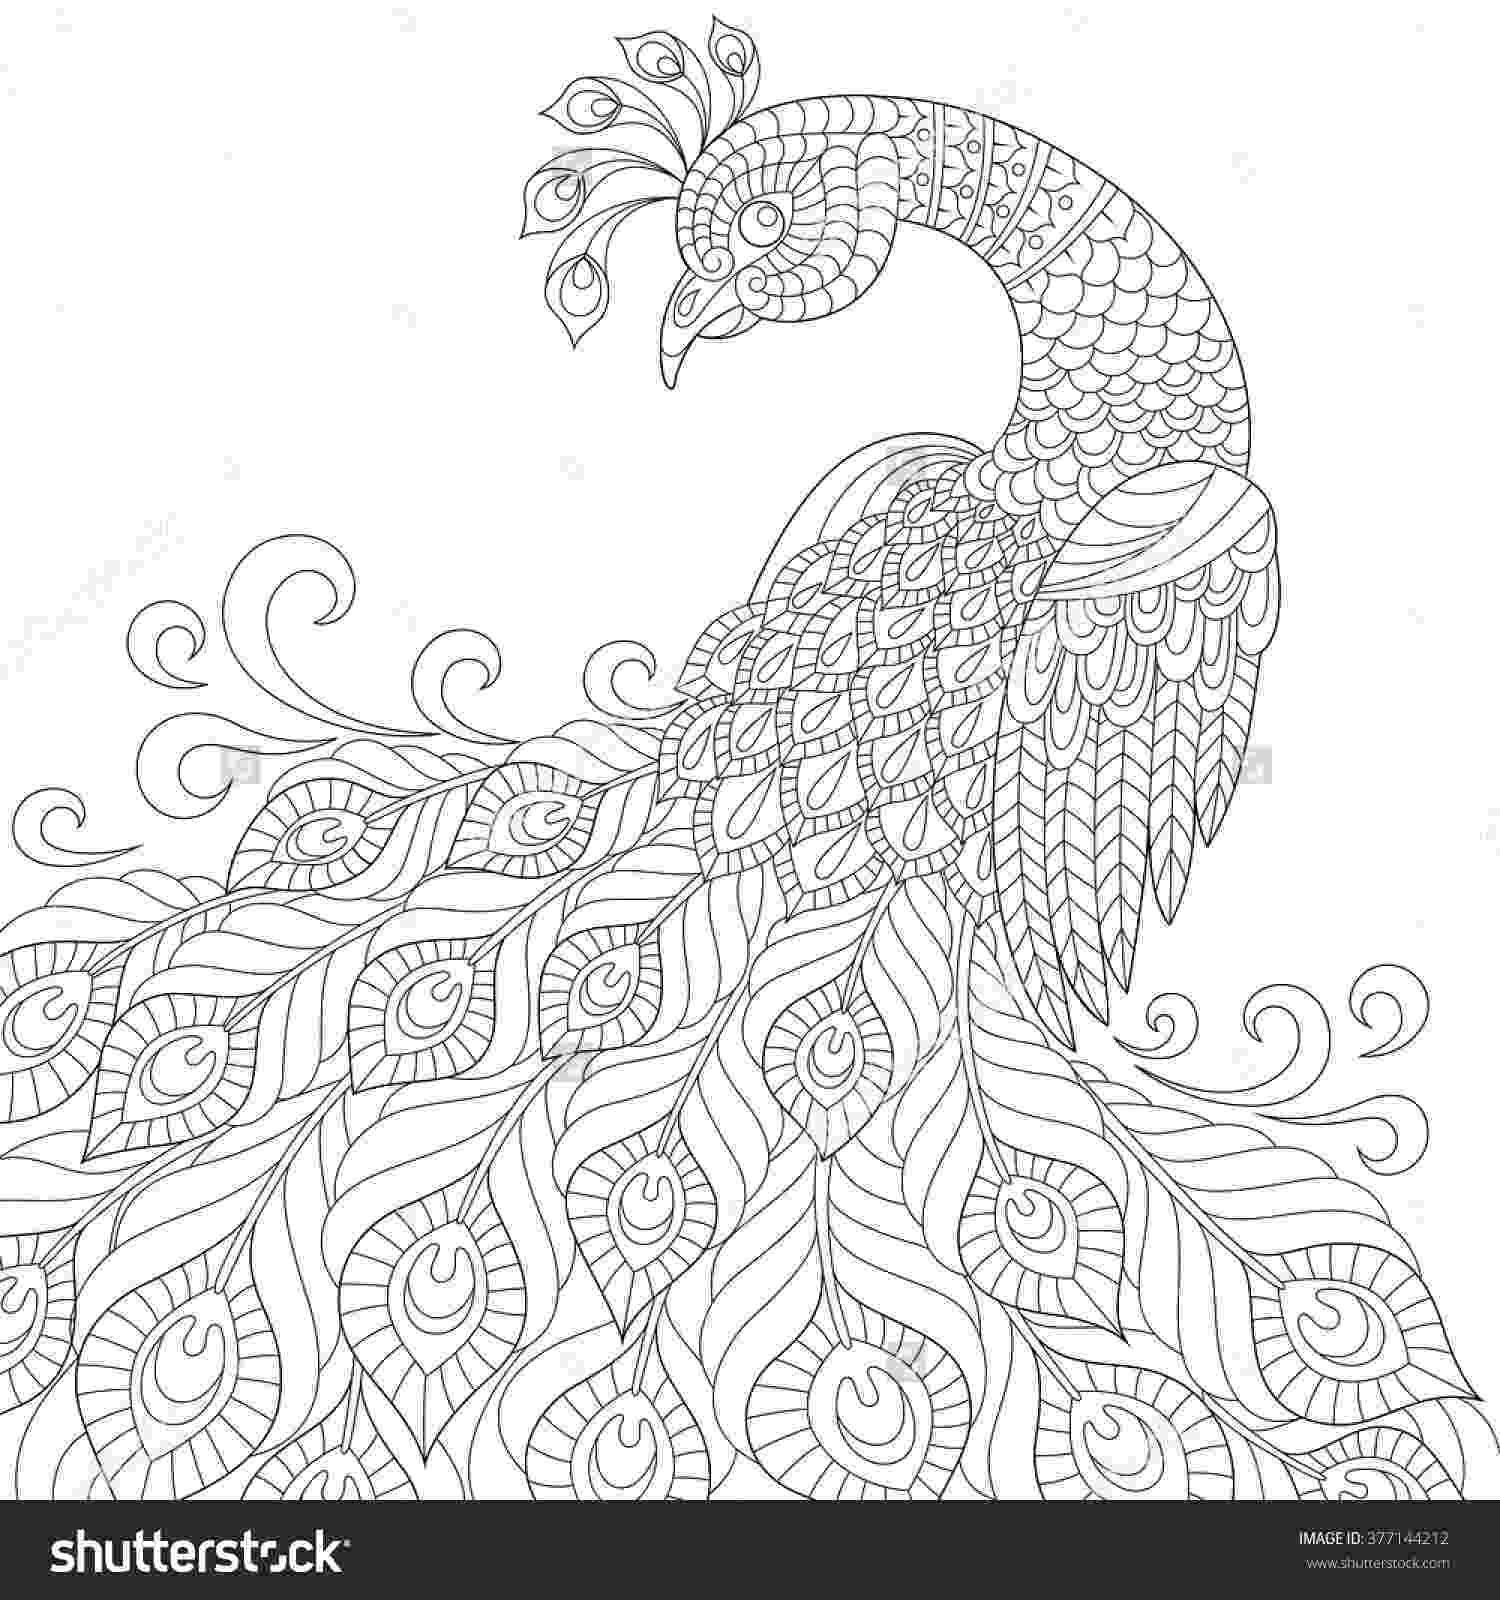 black and white coloring pages for adults decorative peacock adult anti stress coloring page black pages black coloring for adults white and 